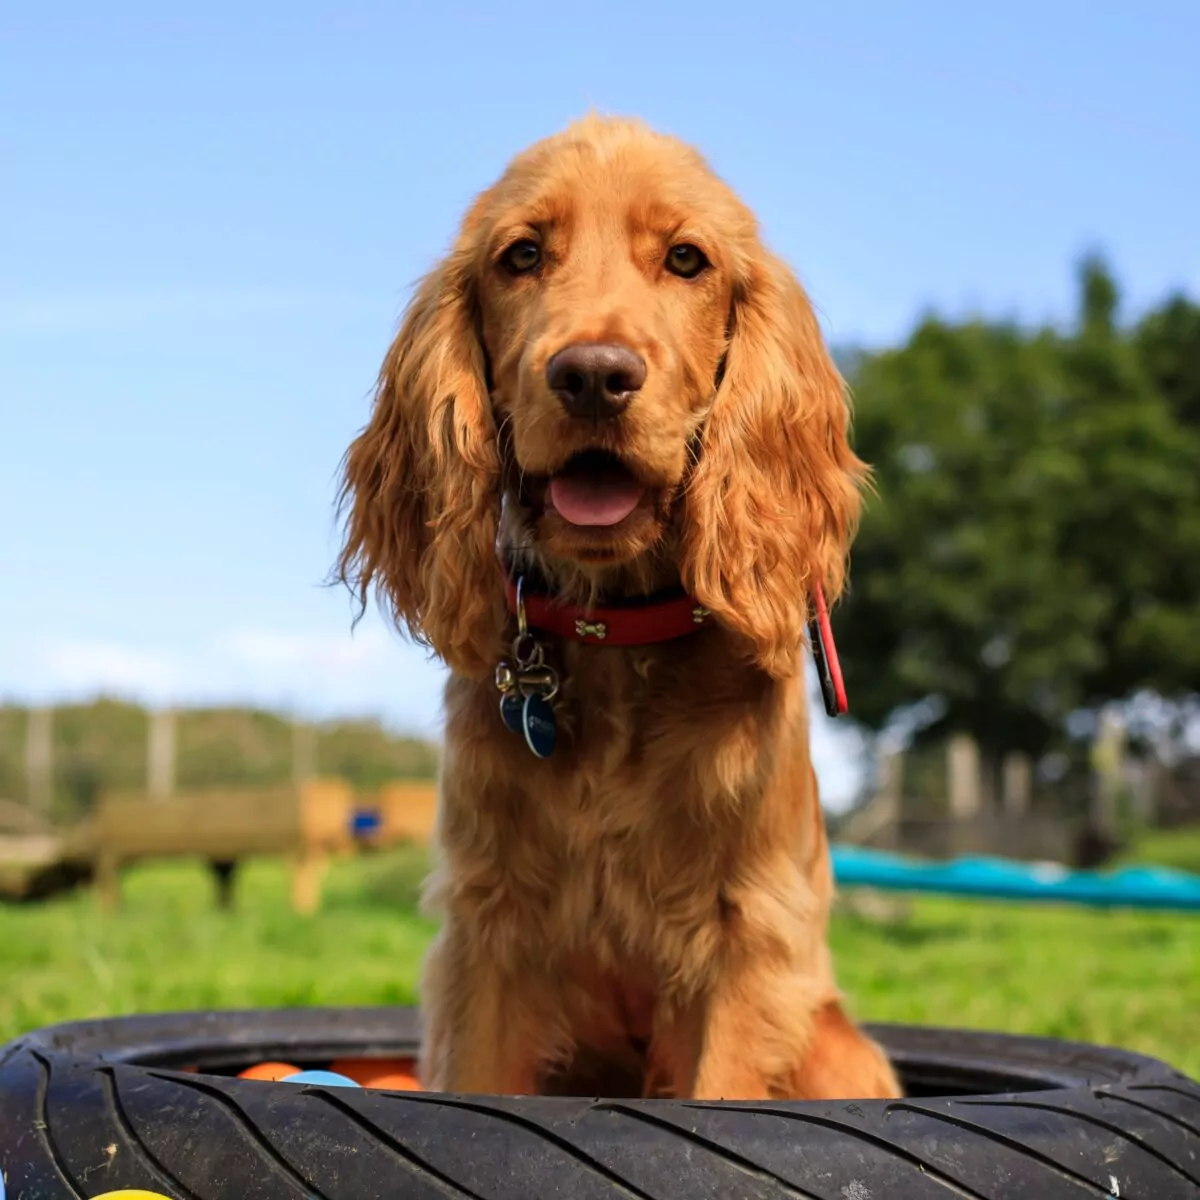 Dog in tyre at doggy day care